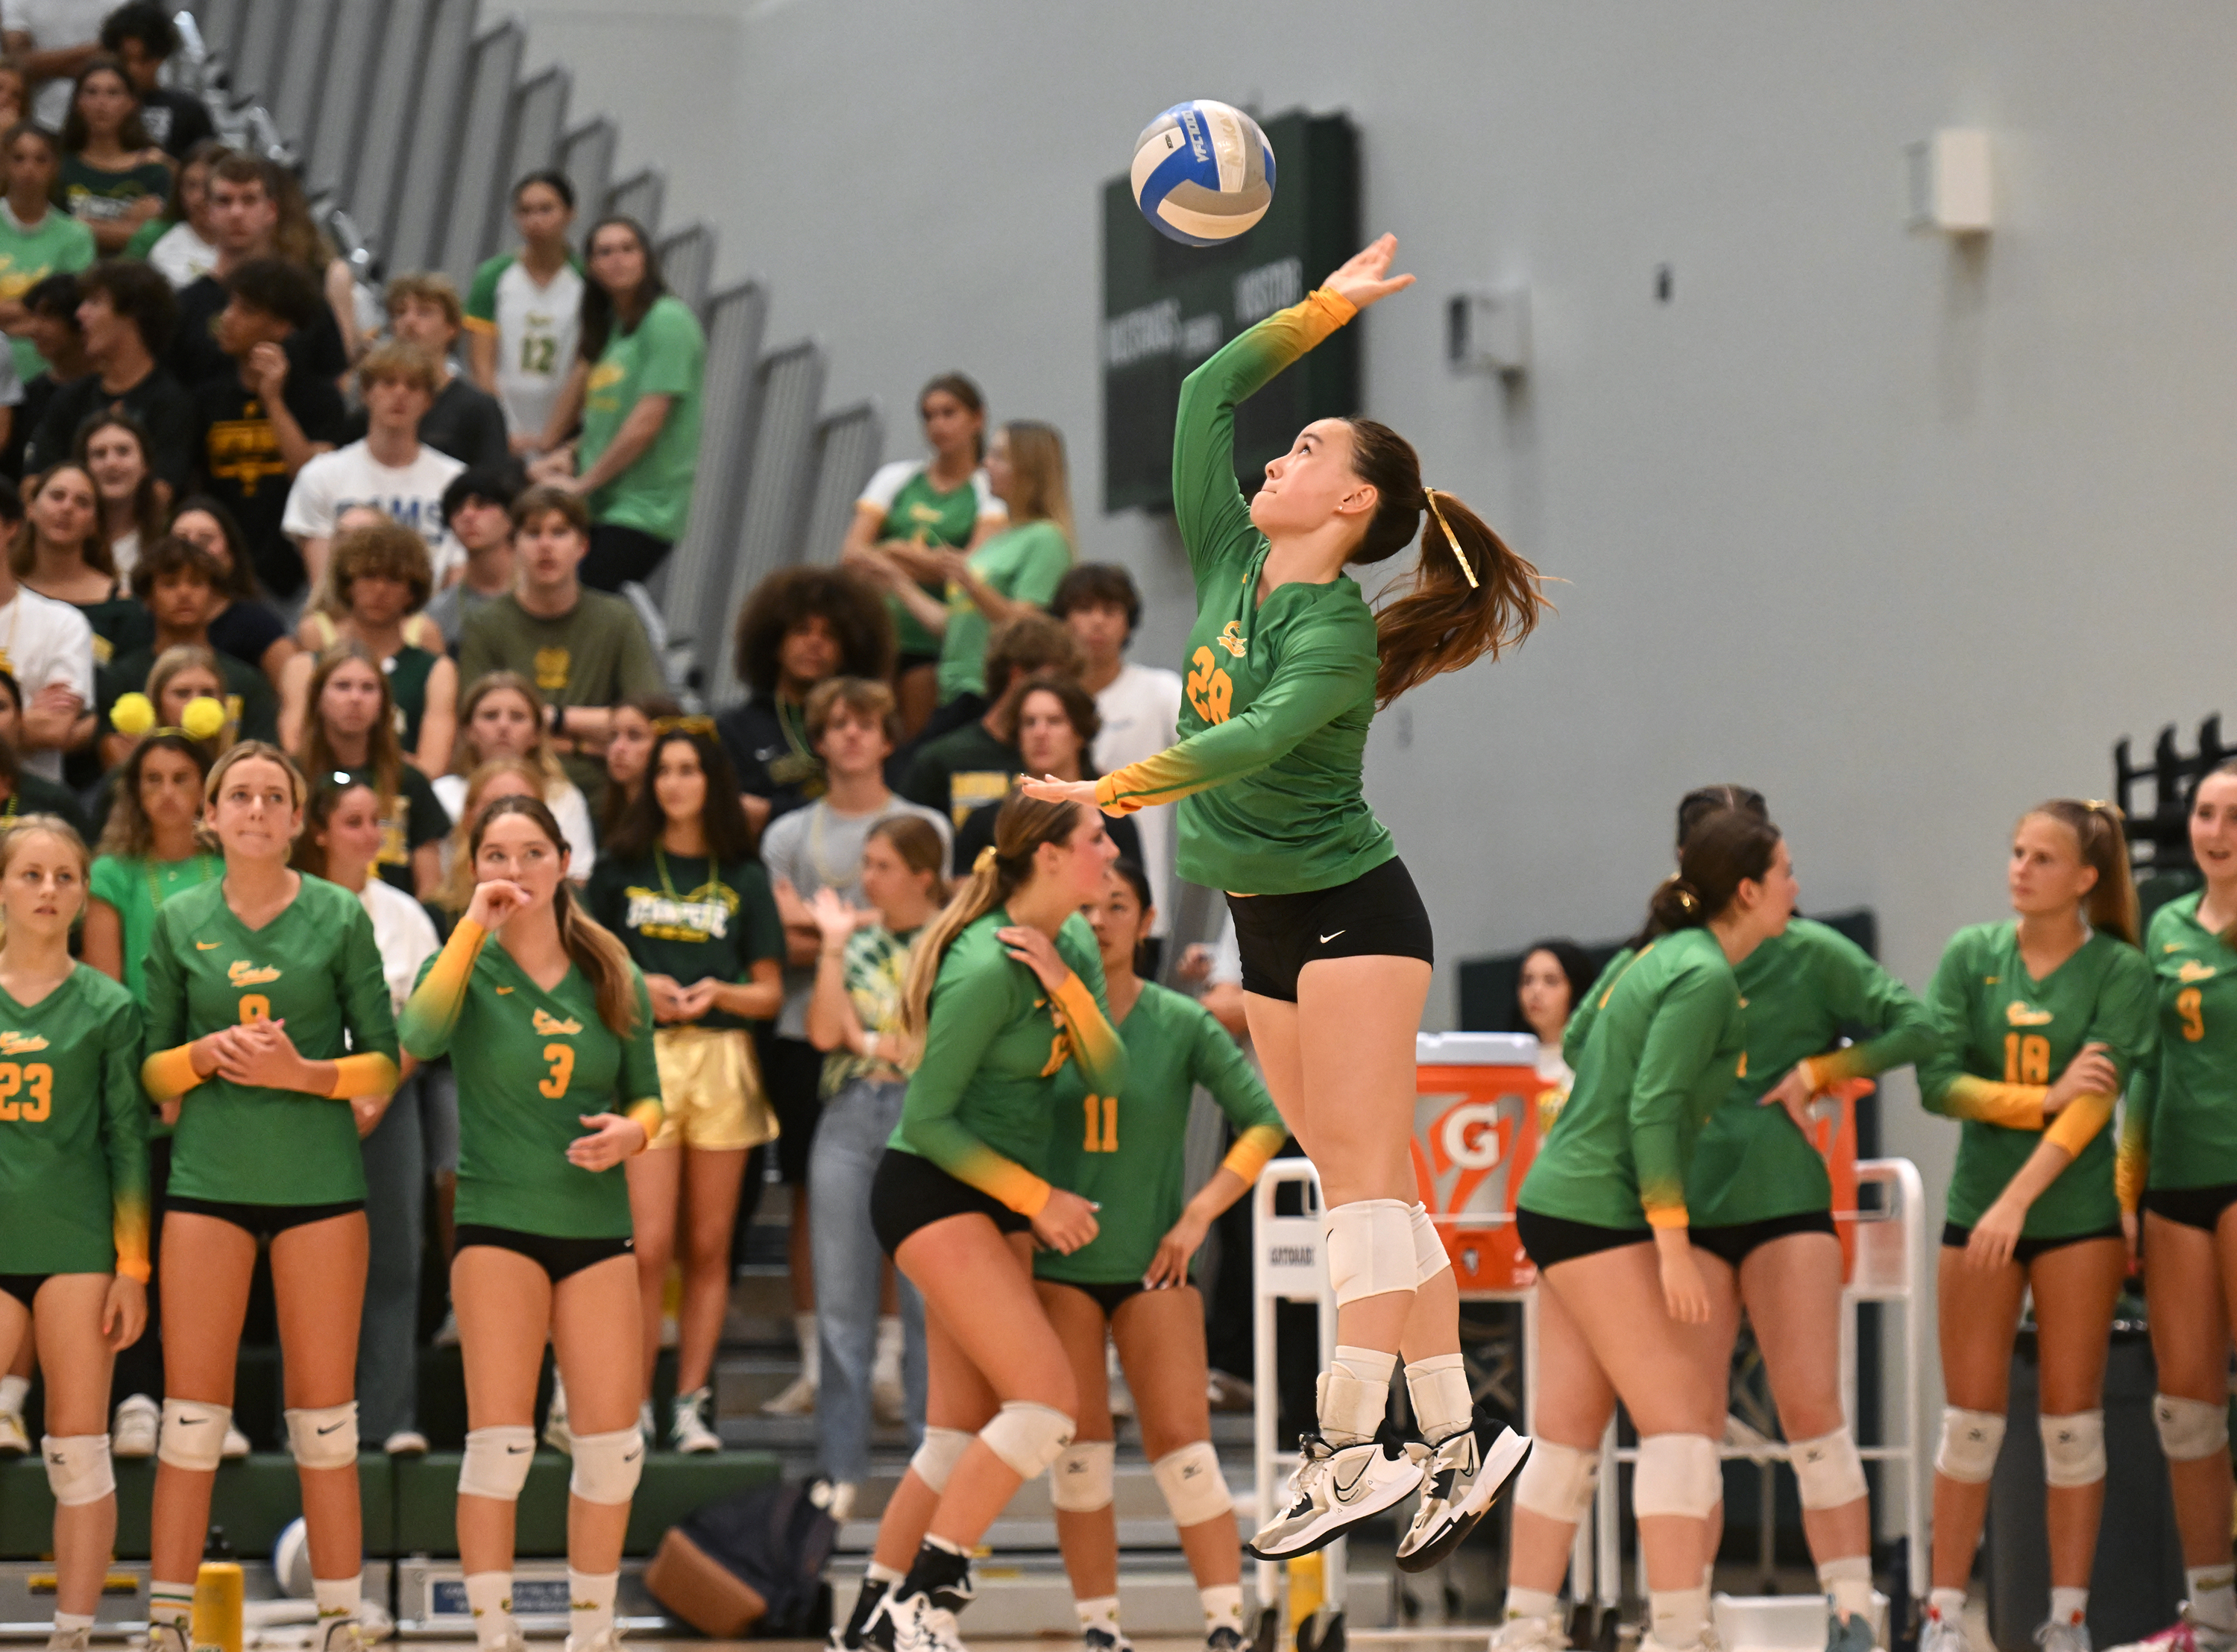 A jump serve from Trixie McMillin (28)